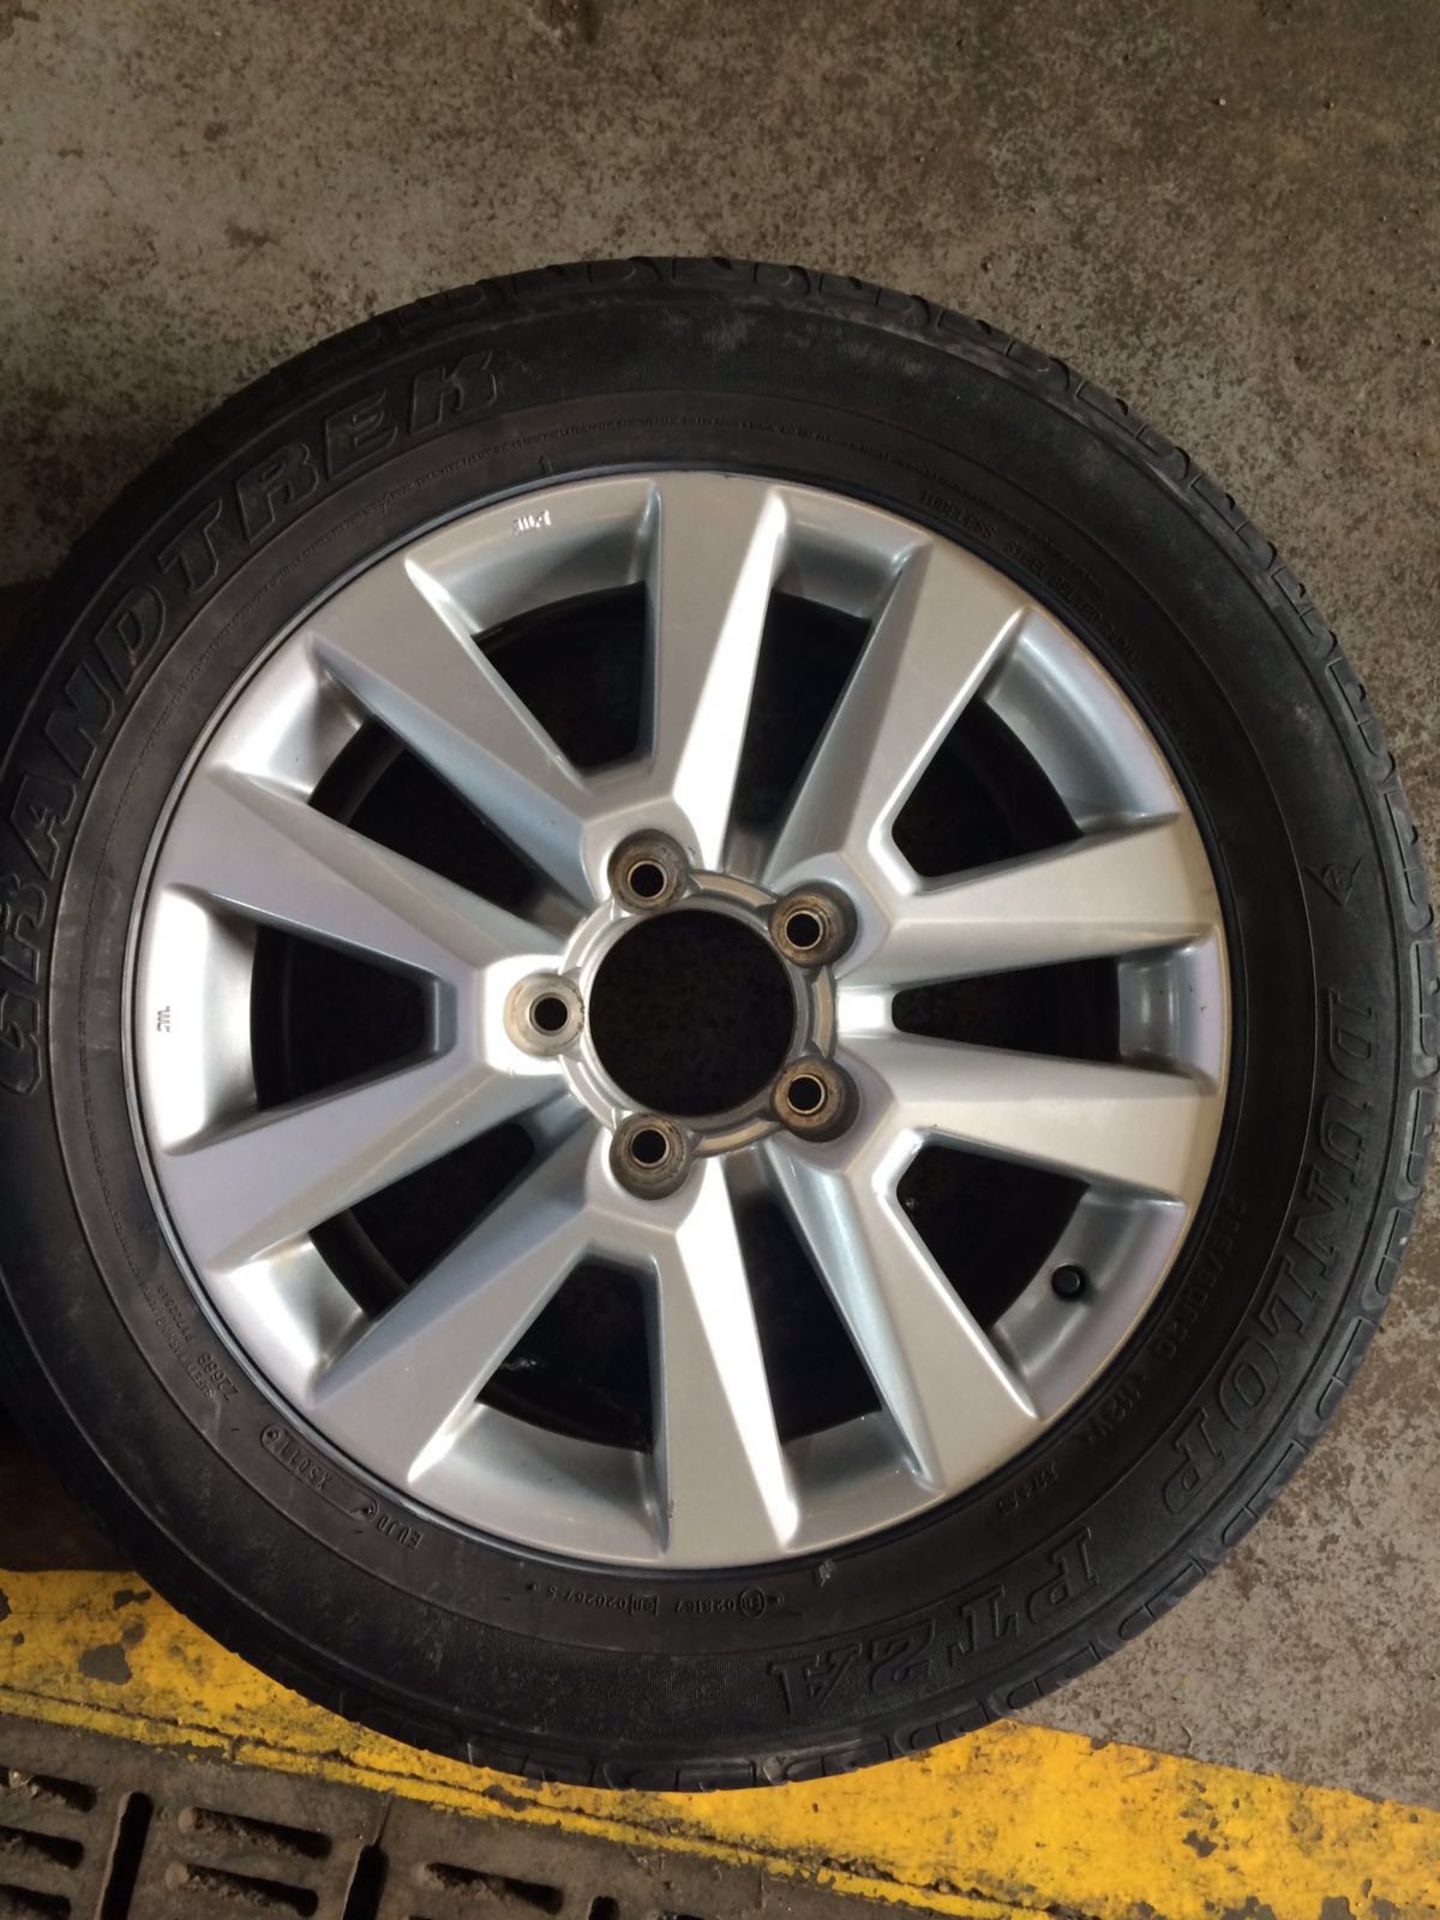 20" TOYOTA LAND-CRUISER WHEEL, REMOVED AS A SPARE WHEEL *NO VAT*